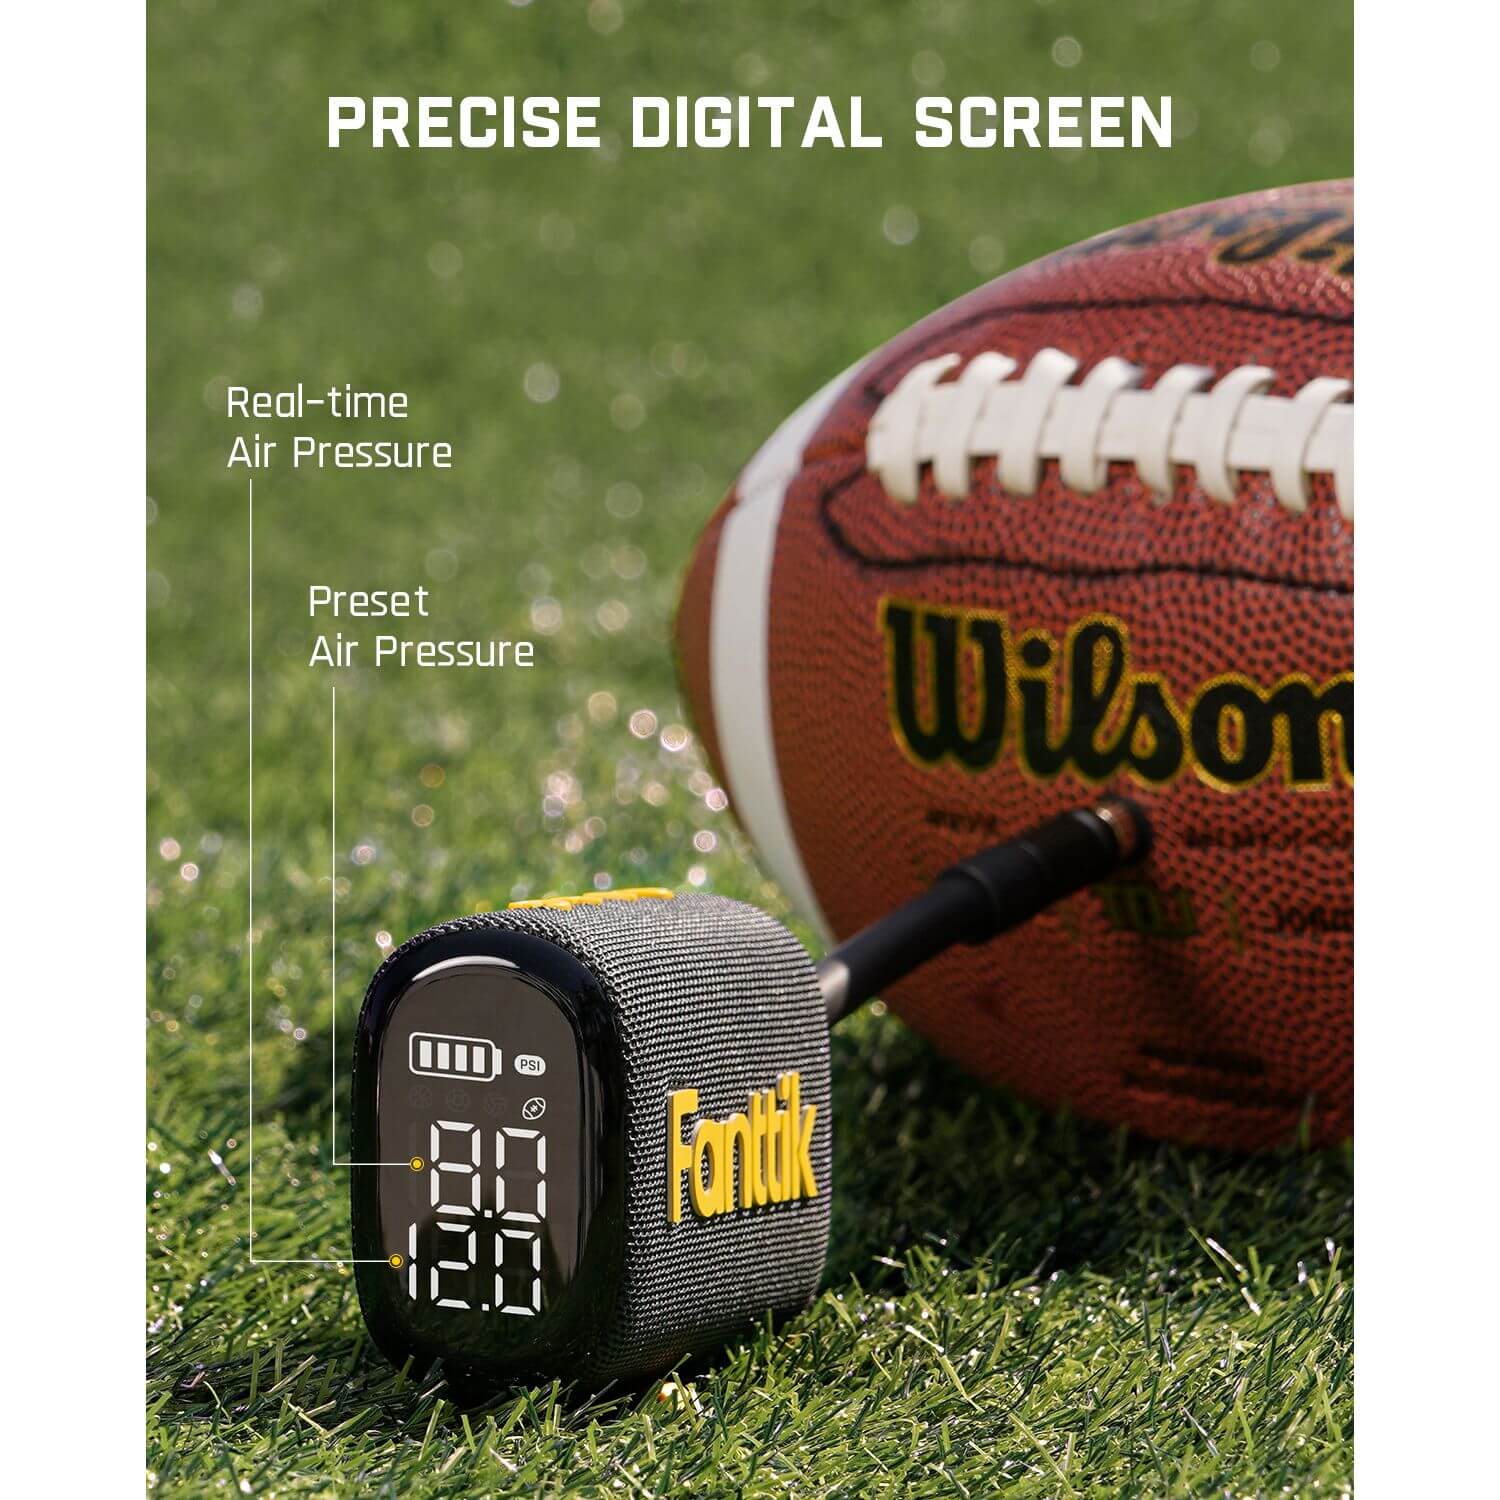 Switch to the 4 preset modes (Basketball, Soccer, Football and Volleyball preset ball pressures) with its intelligent wireless inflation, save time and effort, and focus on what matters-winning!